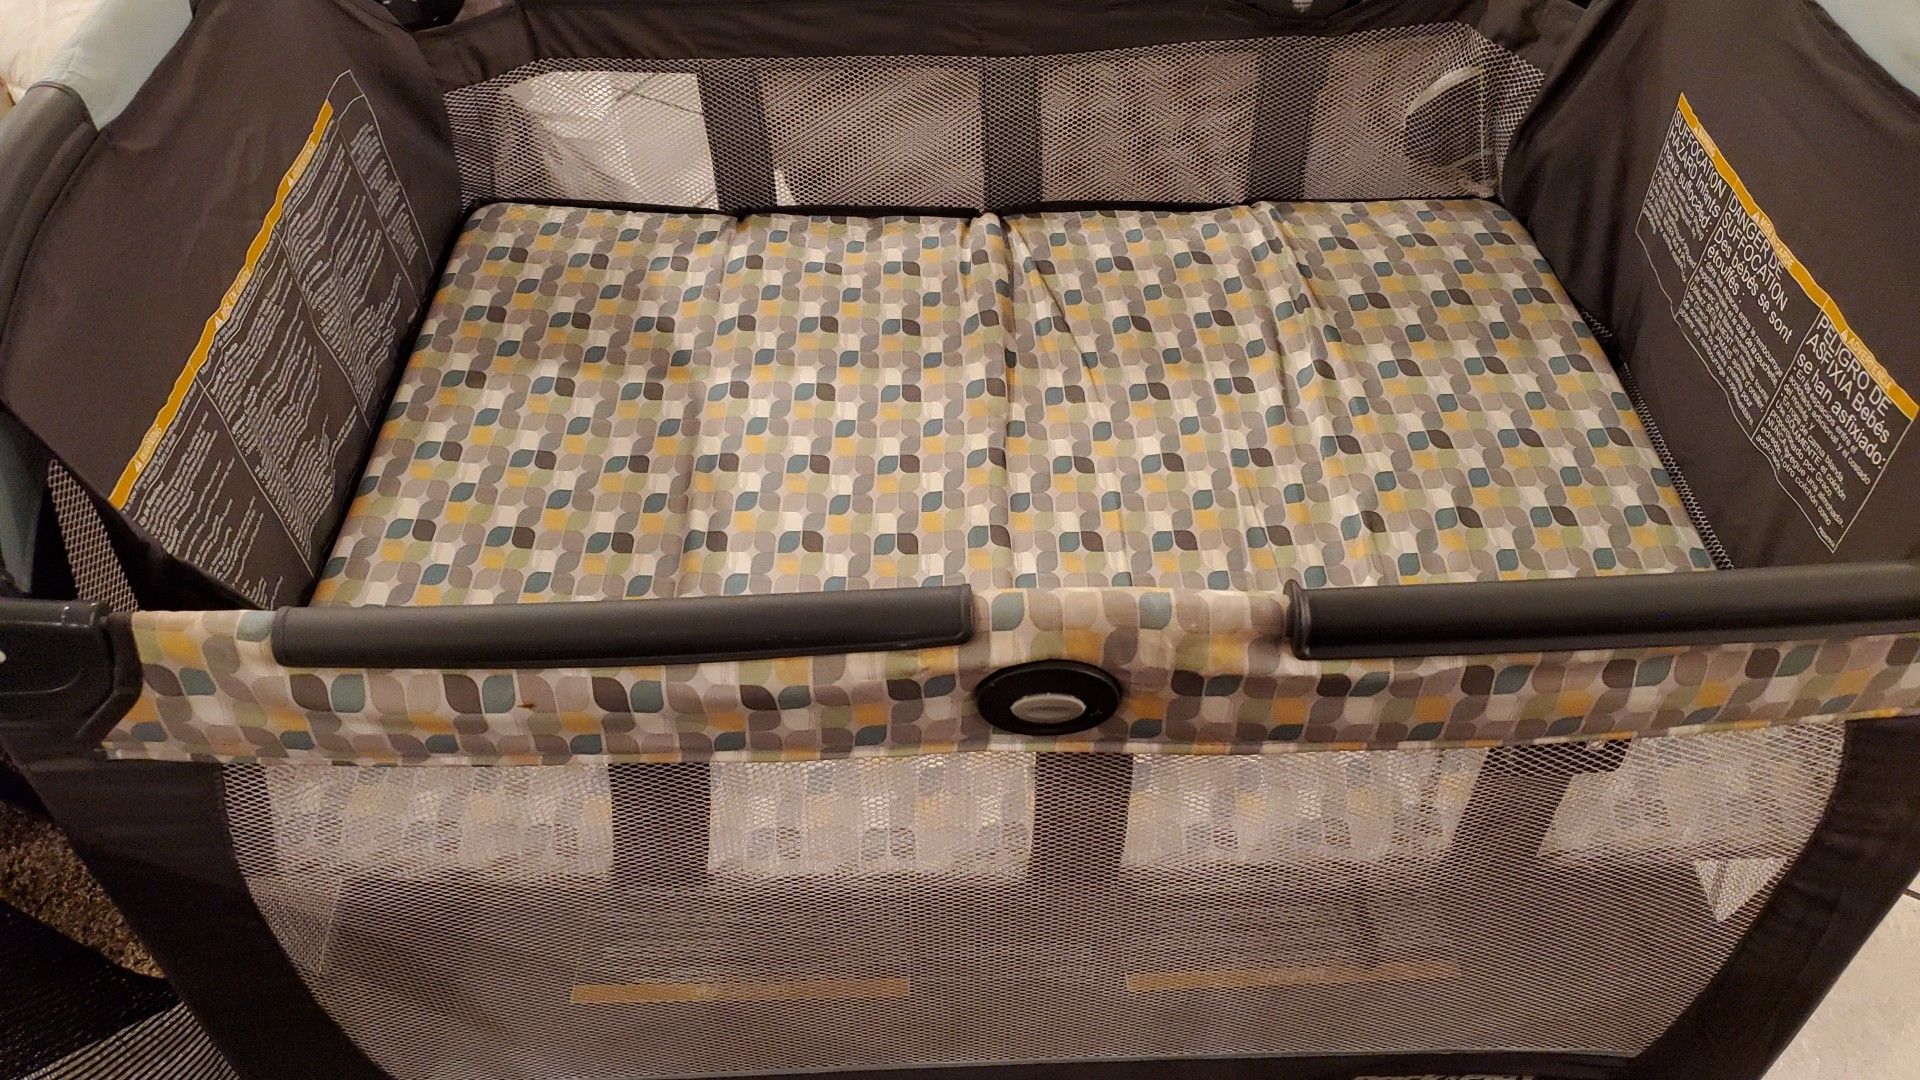 Graco baby playpen. It comes with bag for easy storage.